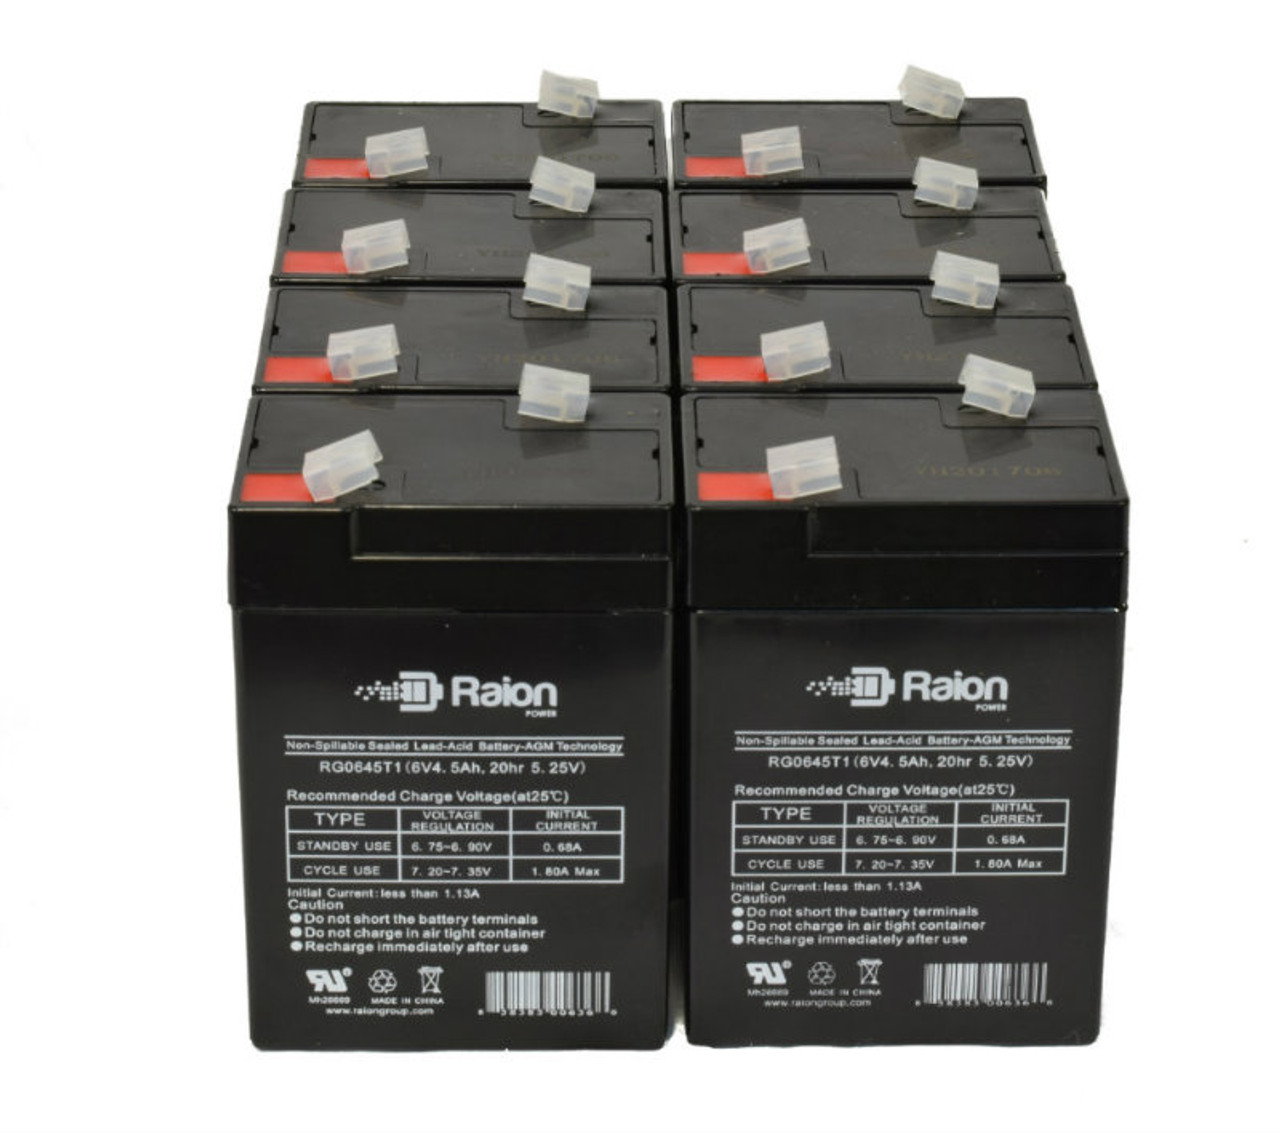 Raion Power RG0645T1 6V 4.5Ah Replacement Medical Equipment Battery for Ohio Medical Product 504US Pulse Oximeter - 8 Pack